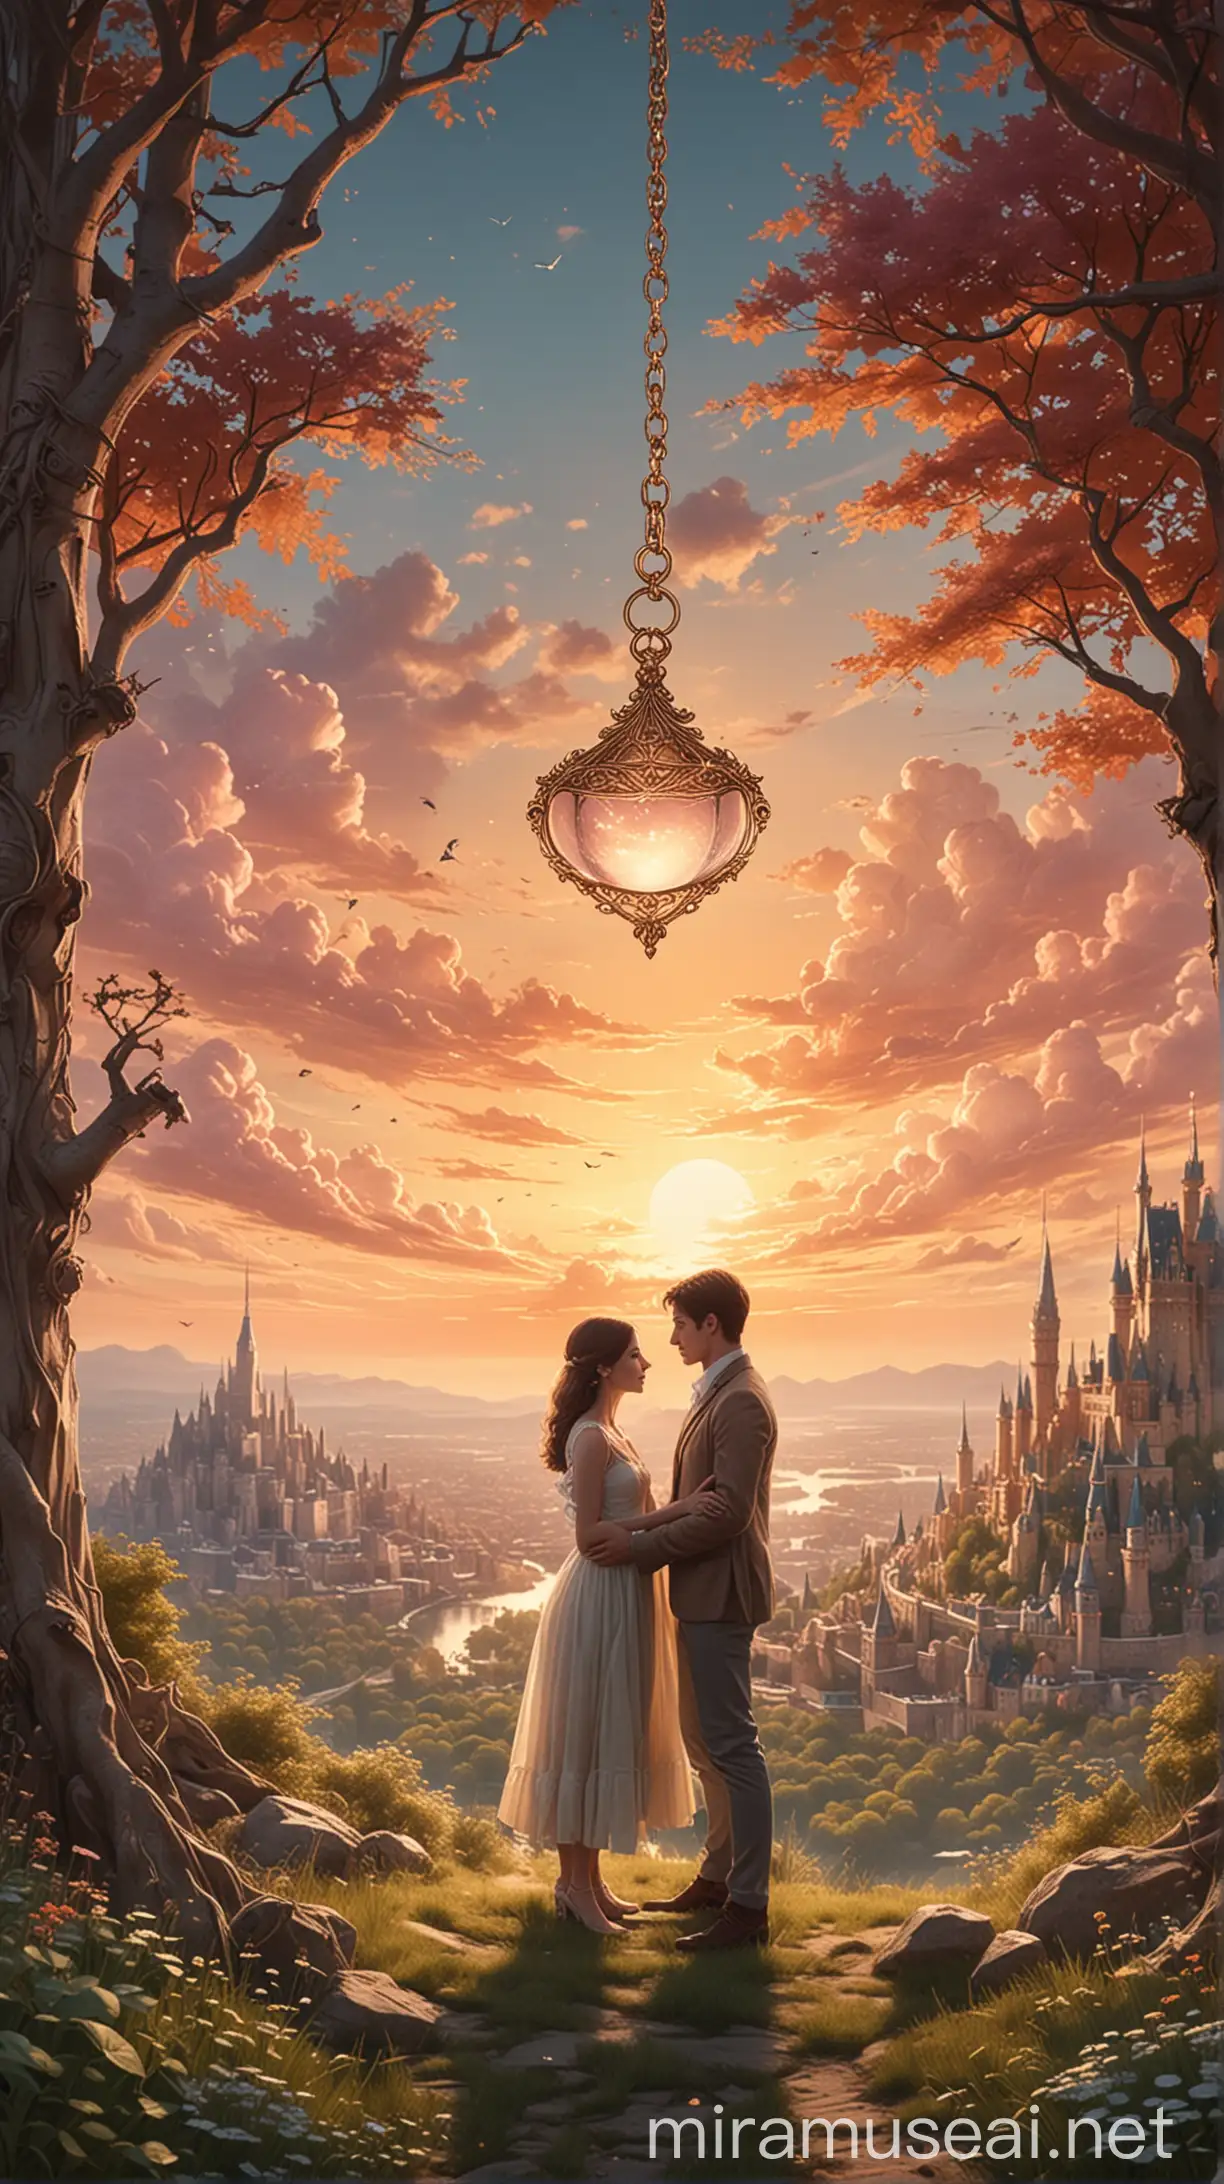 Romantic Couples Journey Sunset in New York City to Magical Lands